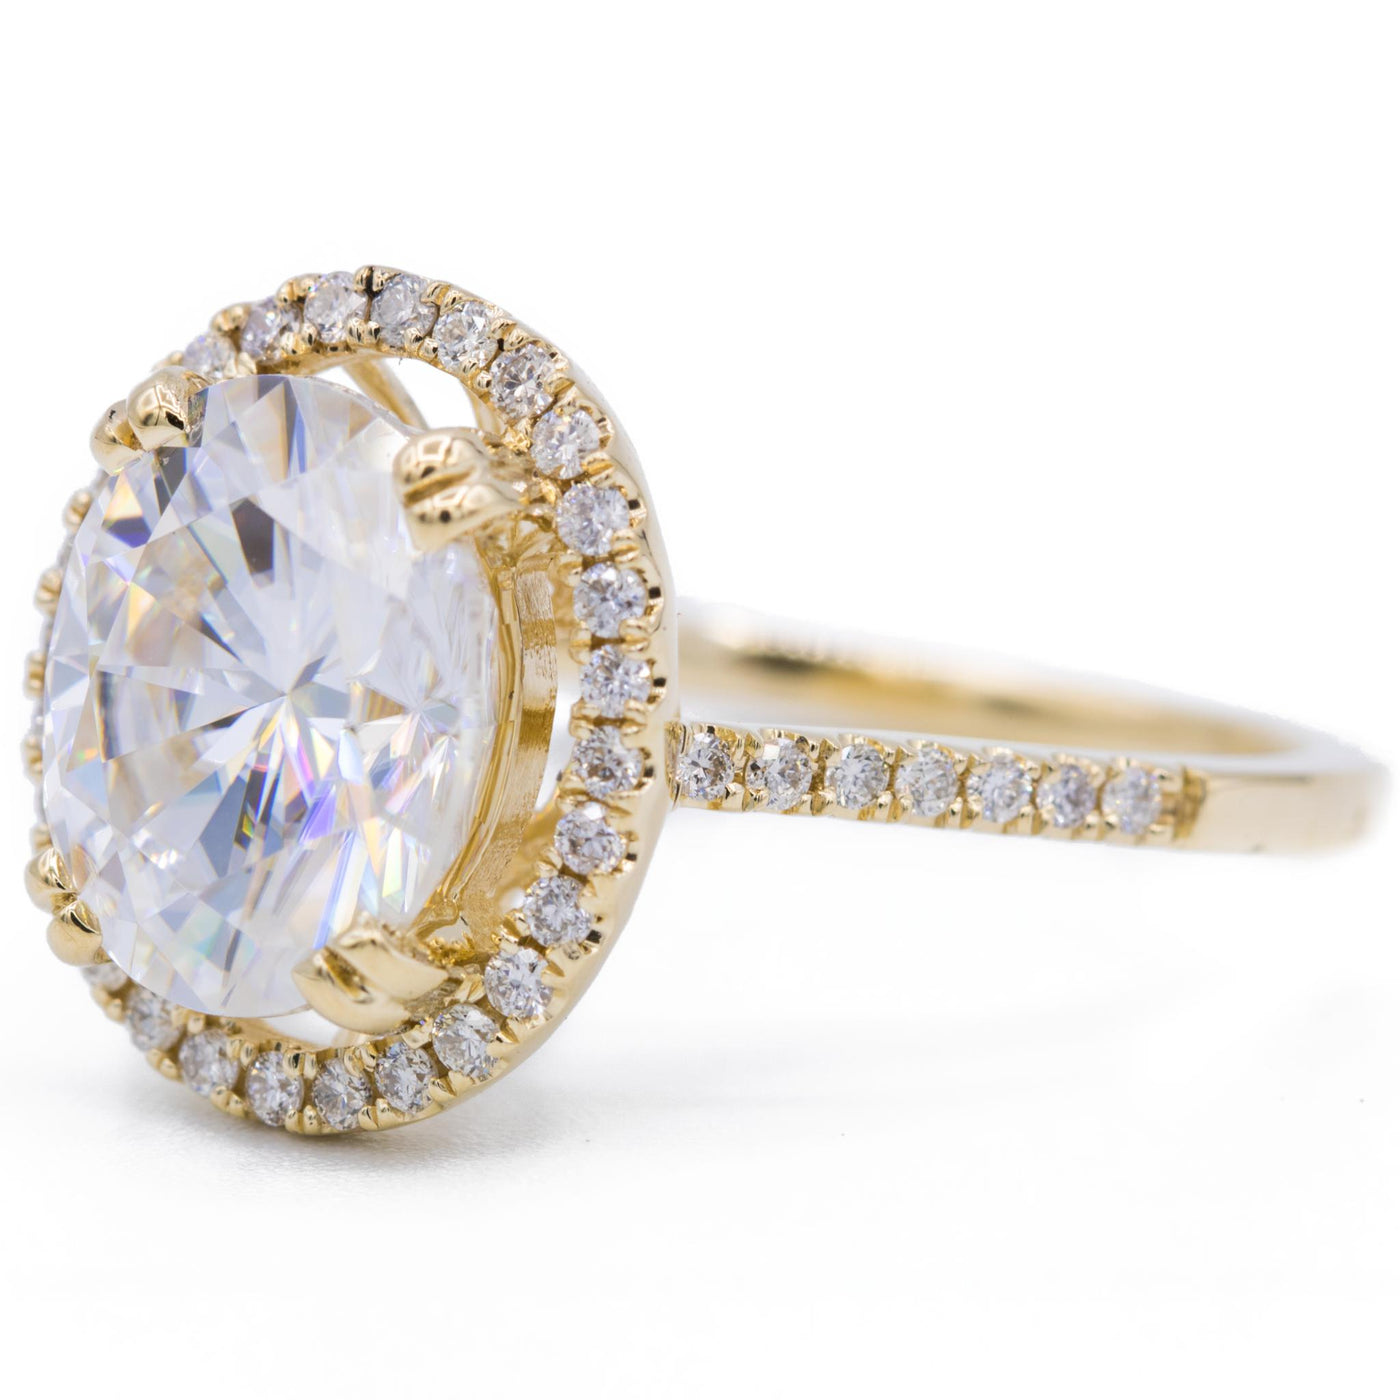 9x7mm Oval Moissanite 14K Yellow Gold Halo with Royal Basket Diamond Ring-Fire & Brilliance ® Creative Designs-Fire & Brilliance ®